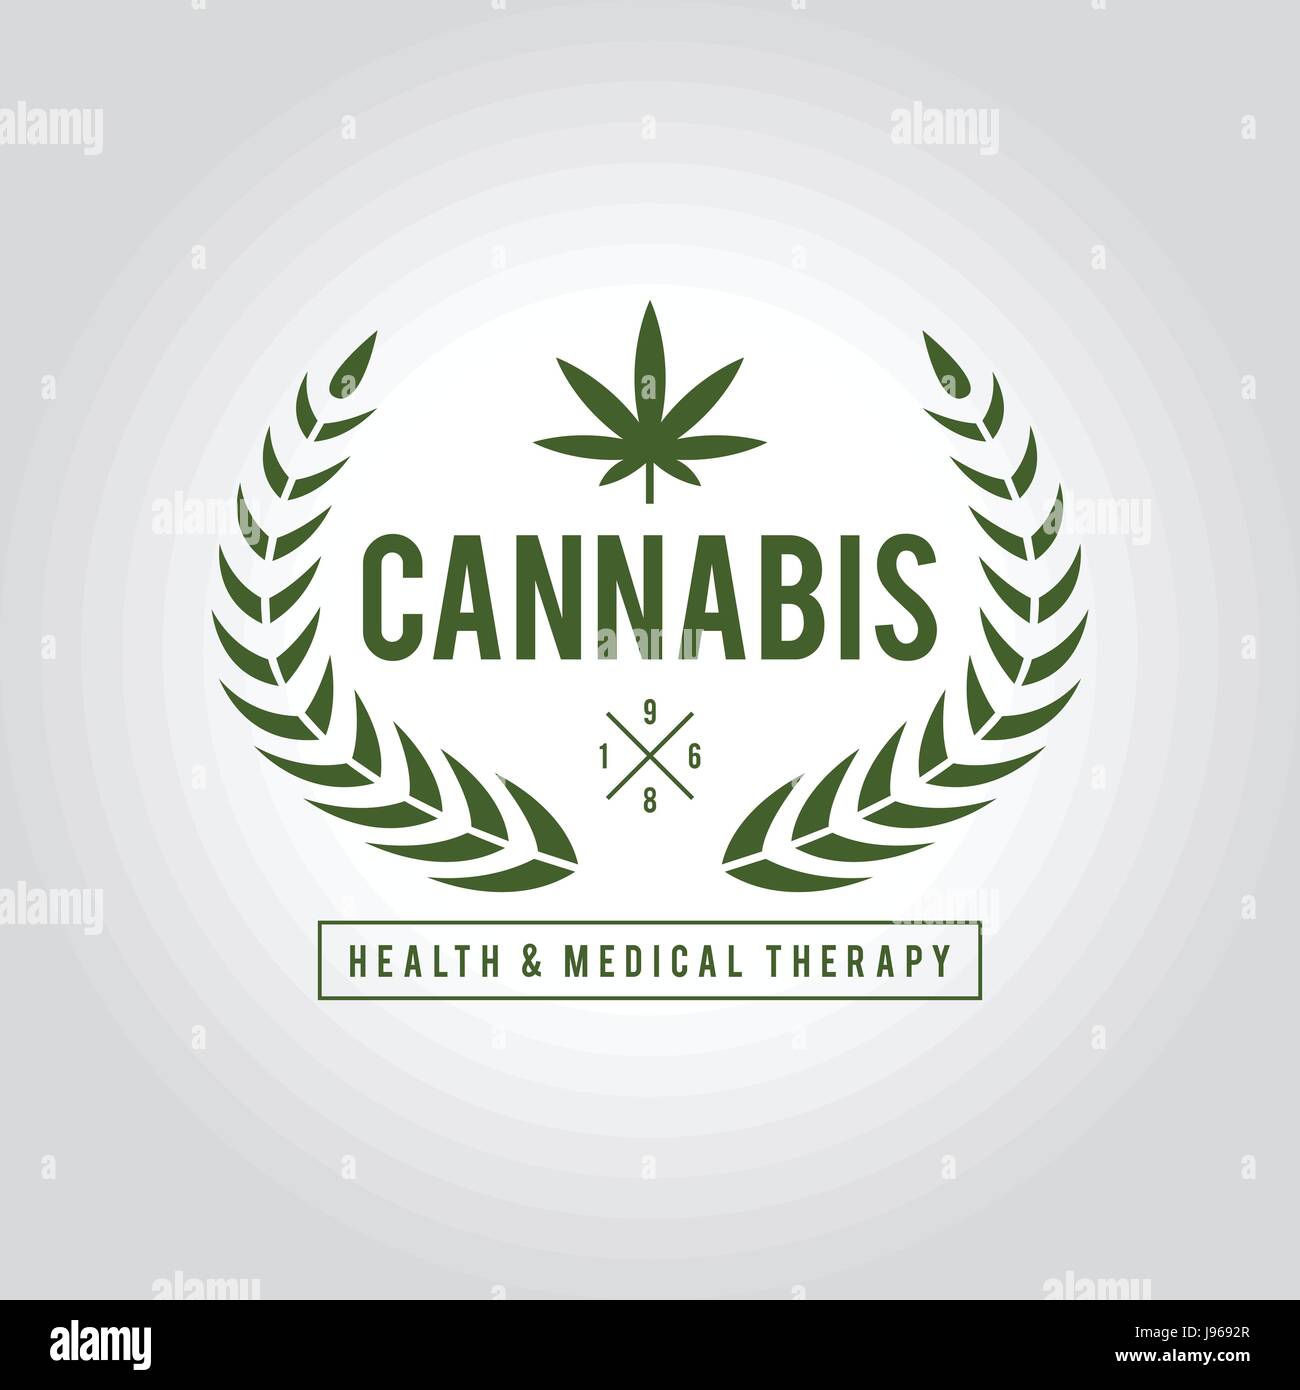 Vintage Marijuana label design, Cannabis Health and Medical therapy, vector illustration Stock Vector